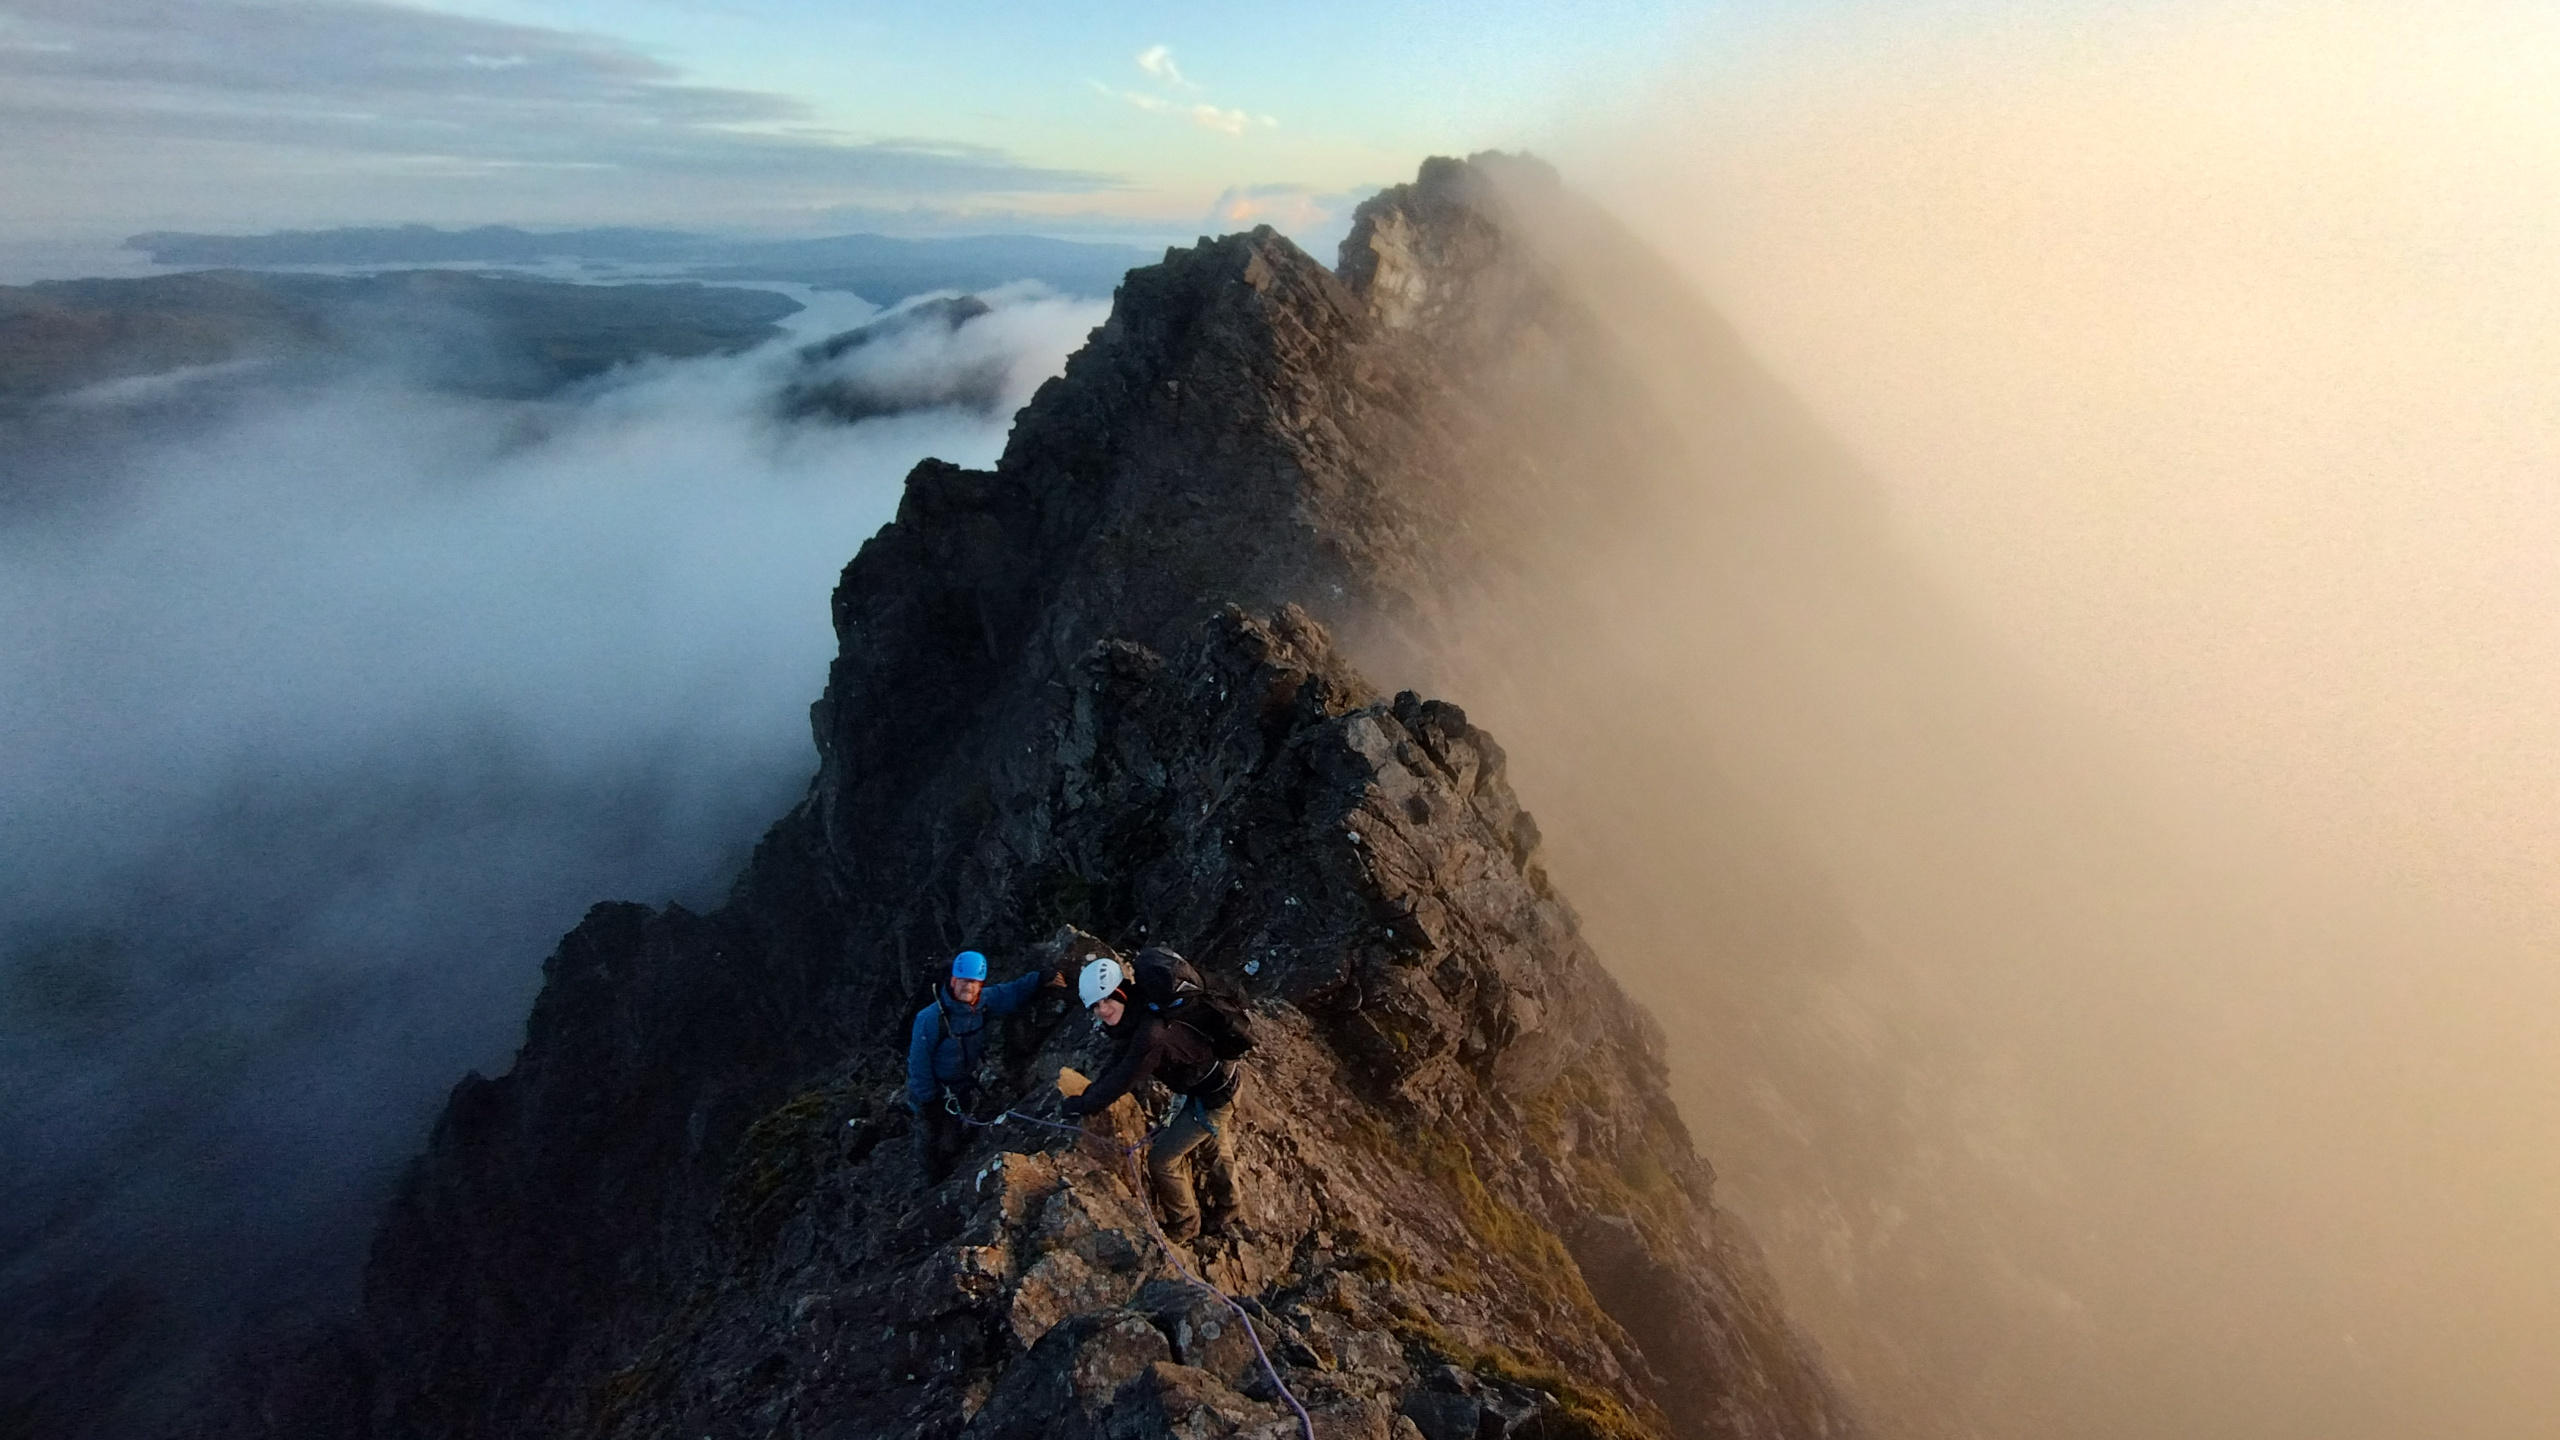 Cuillin Munros above the clouds